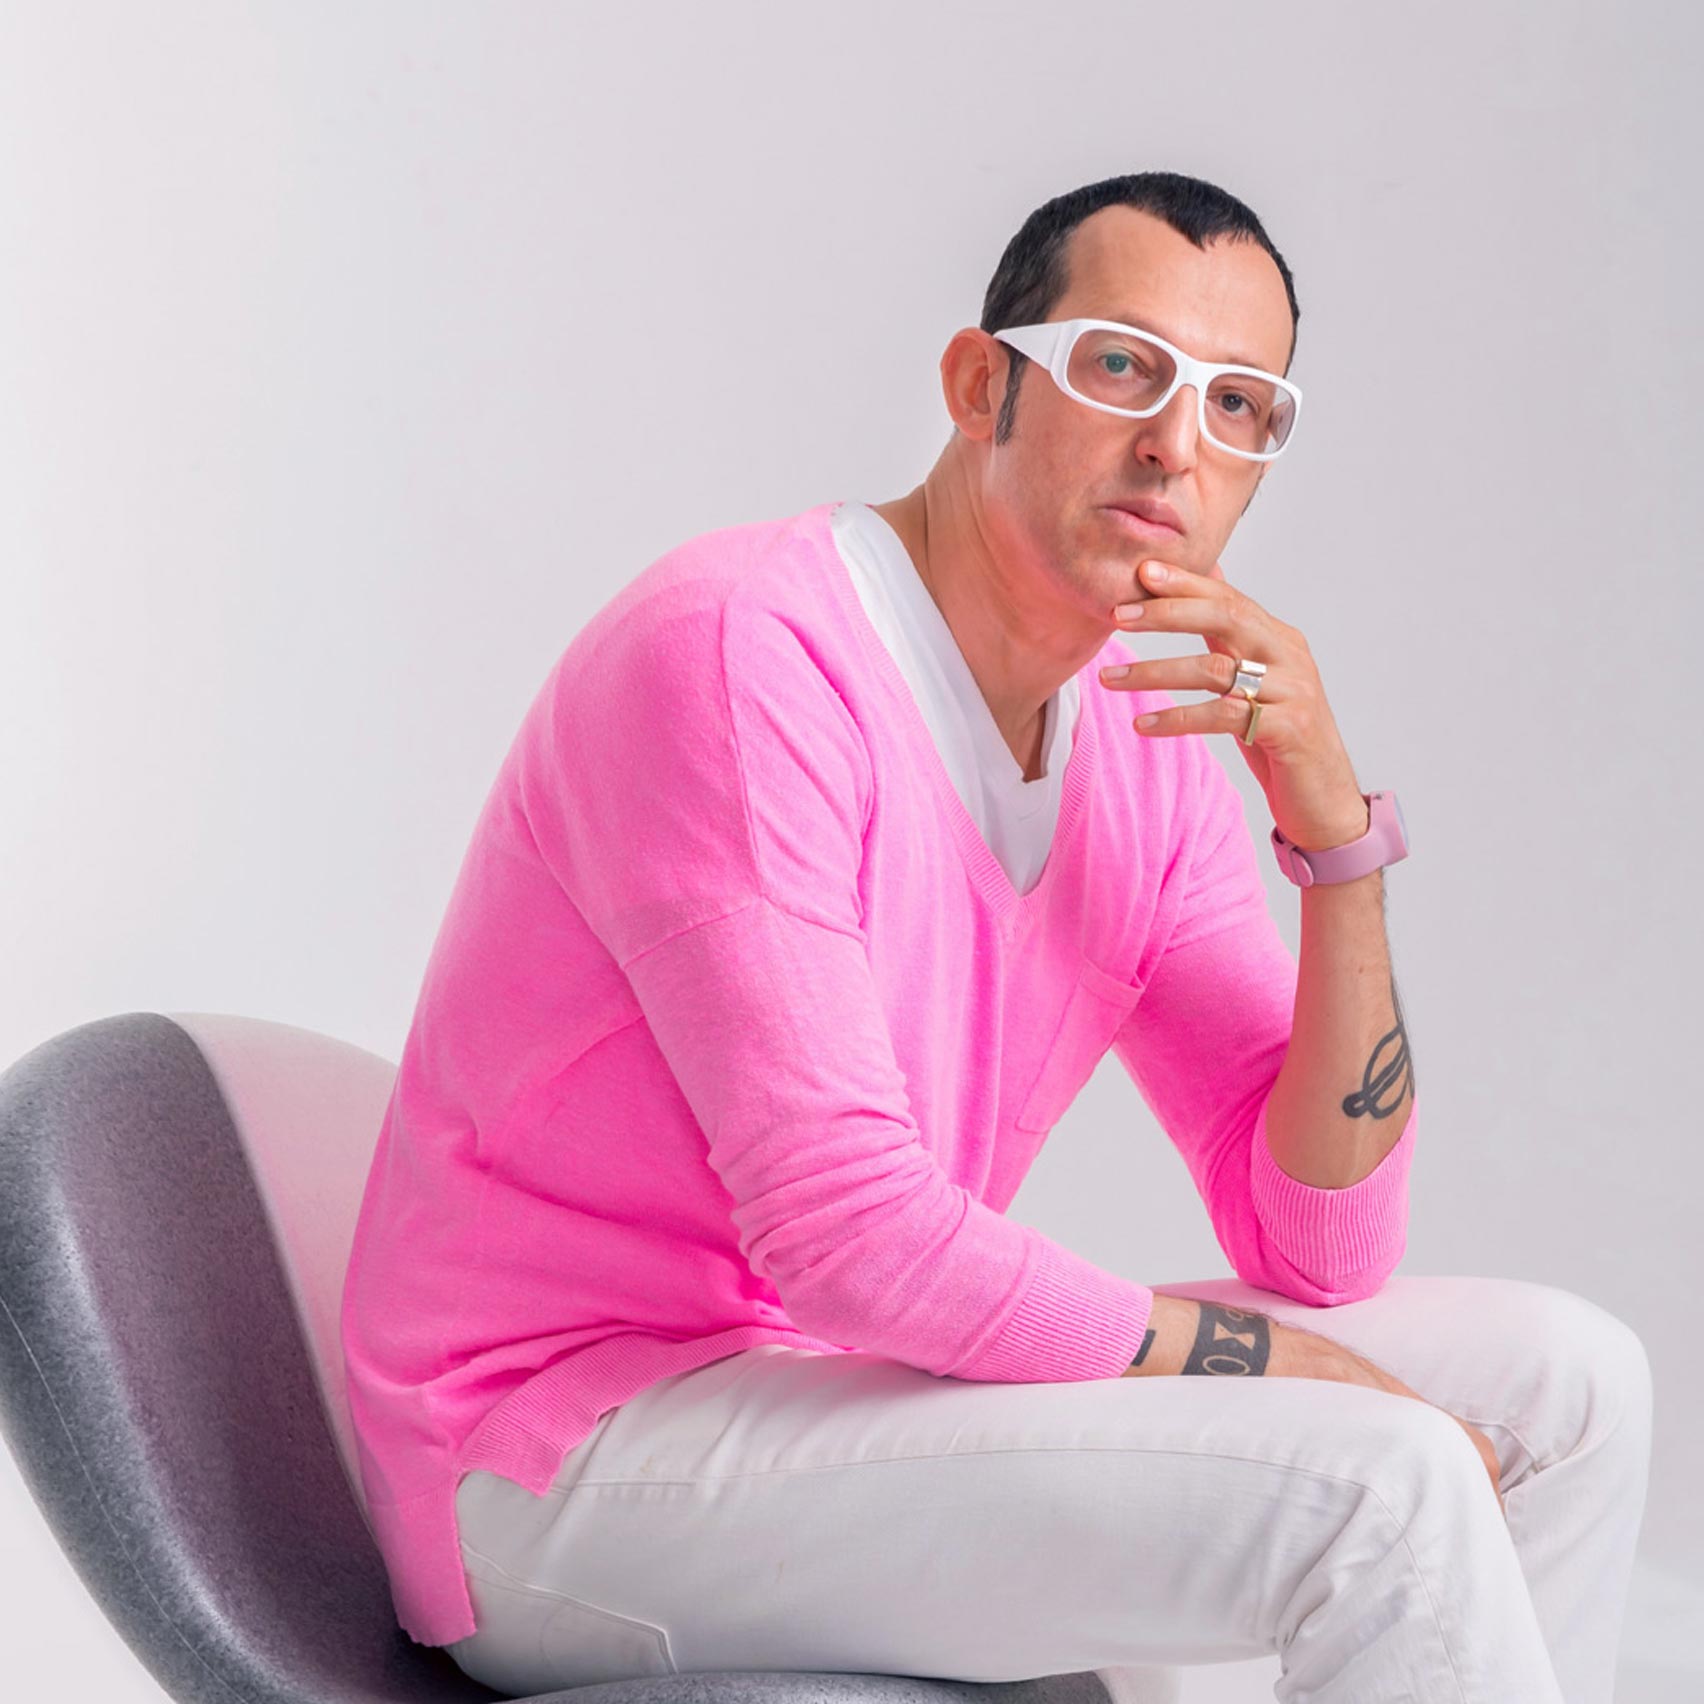 Karim Rashid Suffers Crazy Ordeal After Trying To Enter The